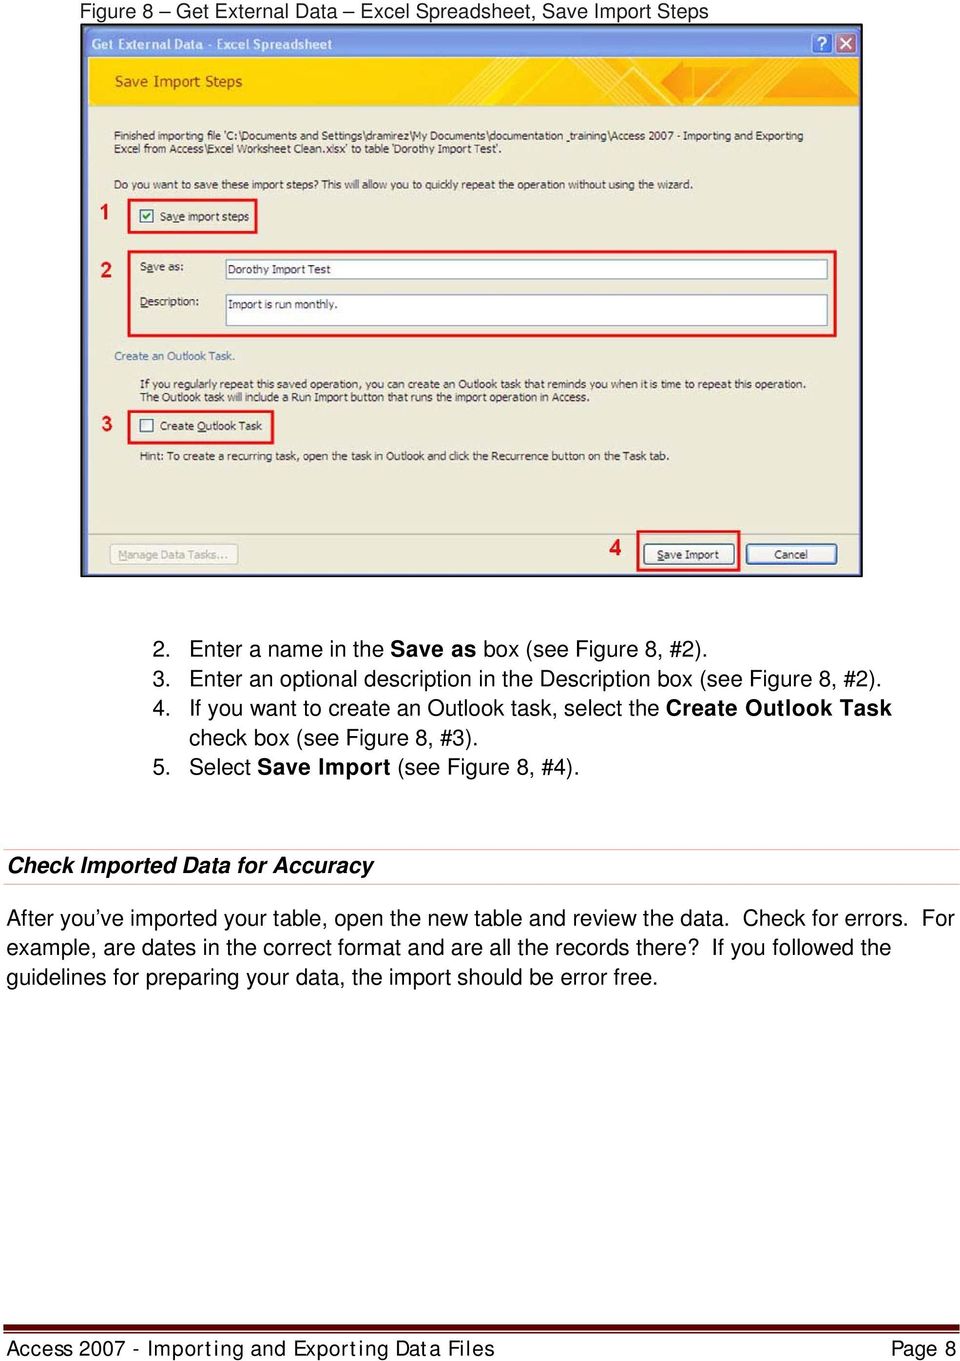 If you want to create an Outlook task, select the Create Outlook Task check box (see Figure 8, #3). 5. Select Save Import (see Figure 8, #4).